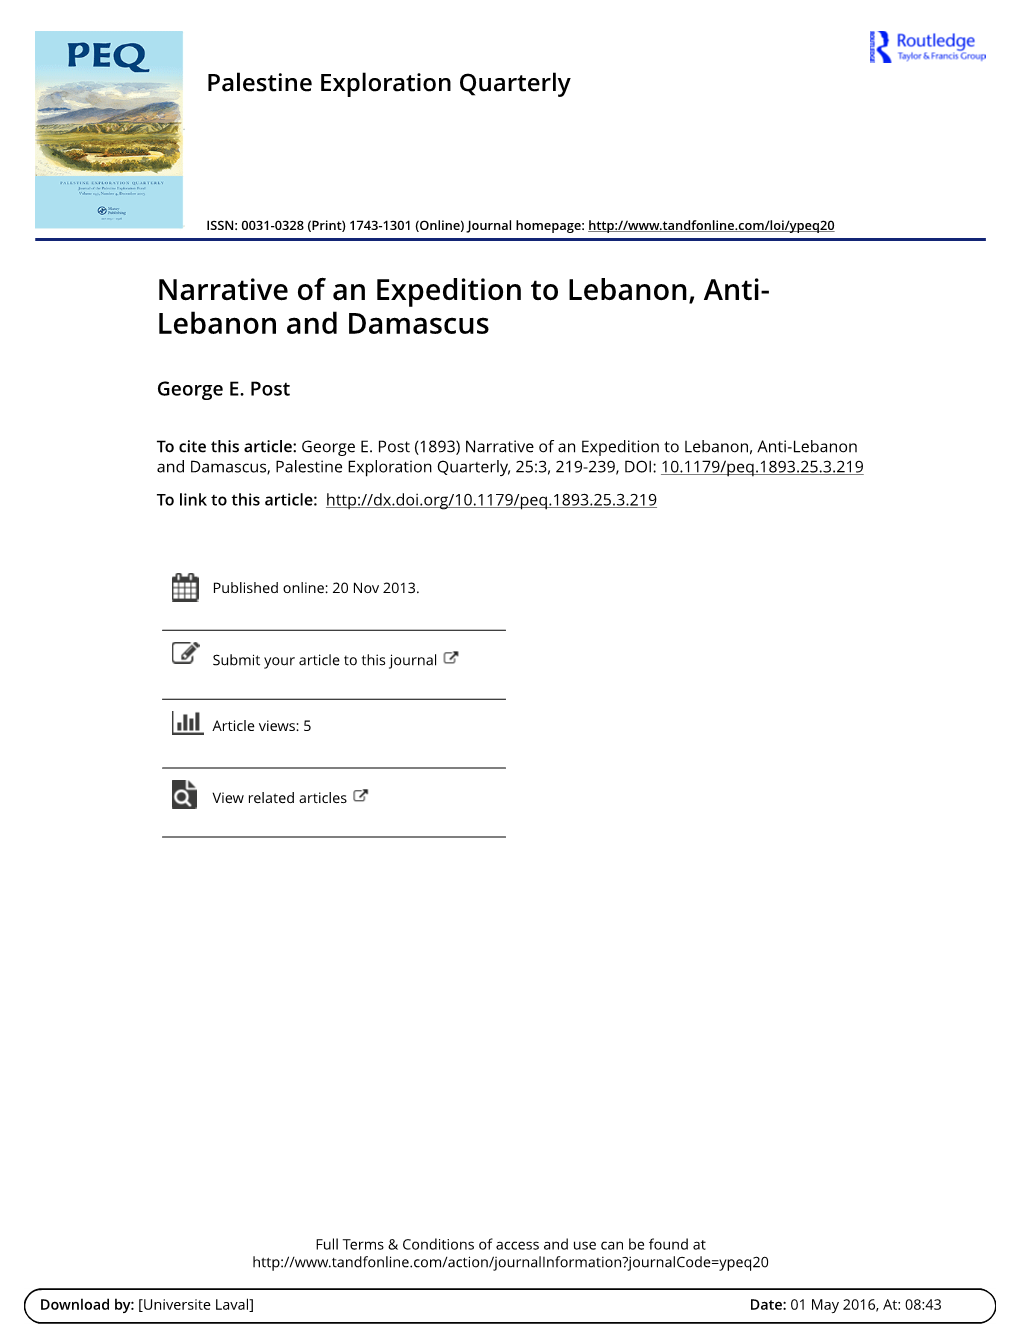 Narrative of an Expedition to Lebanon, Anti- Lebanon and Damascus